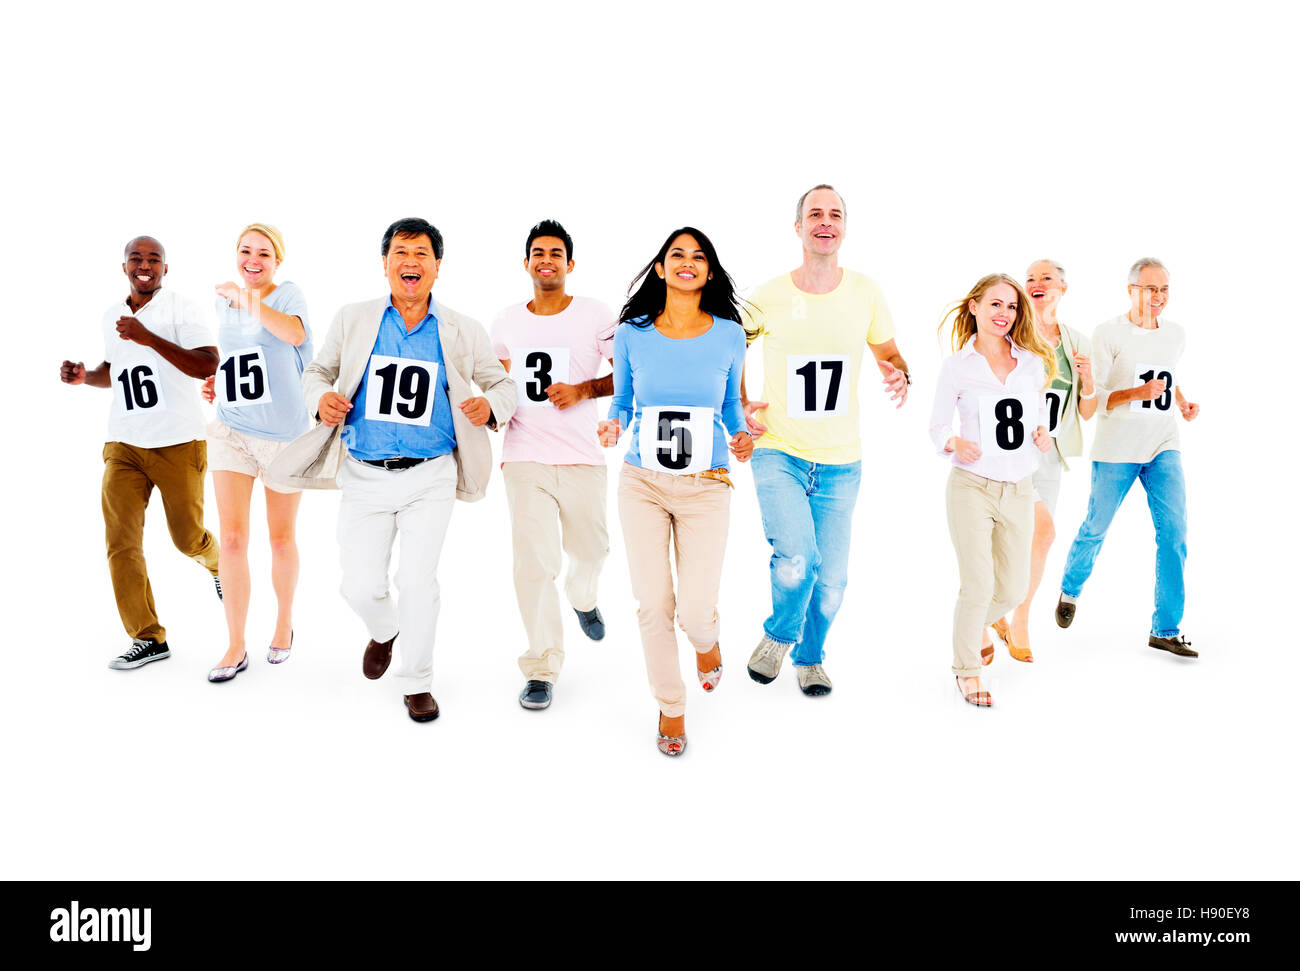 Group of People Running Competition Goal Concept Stock Photo